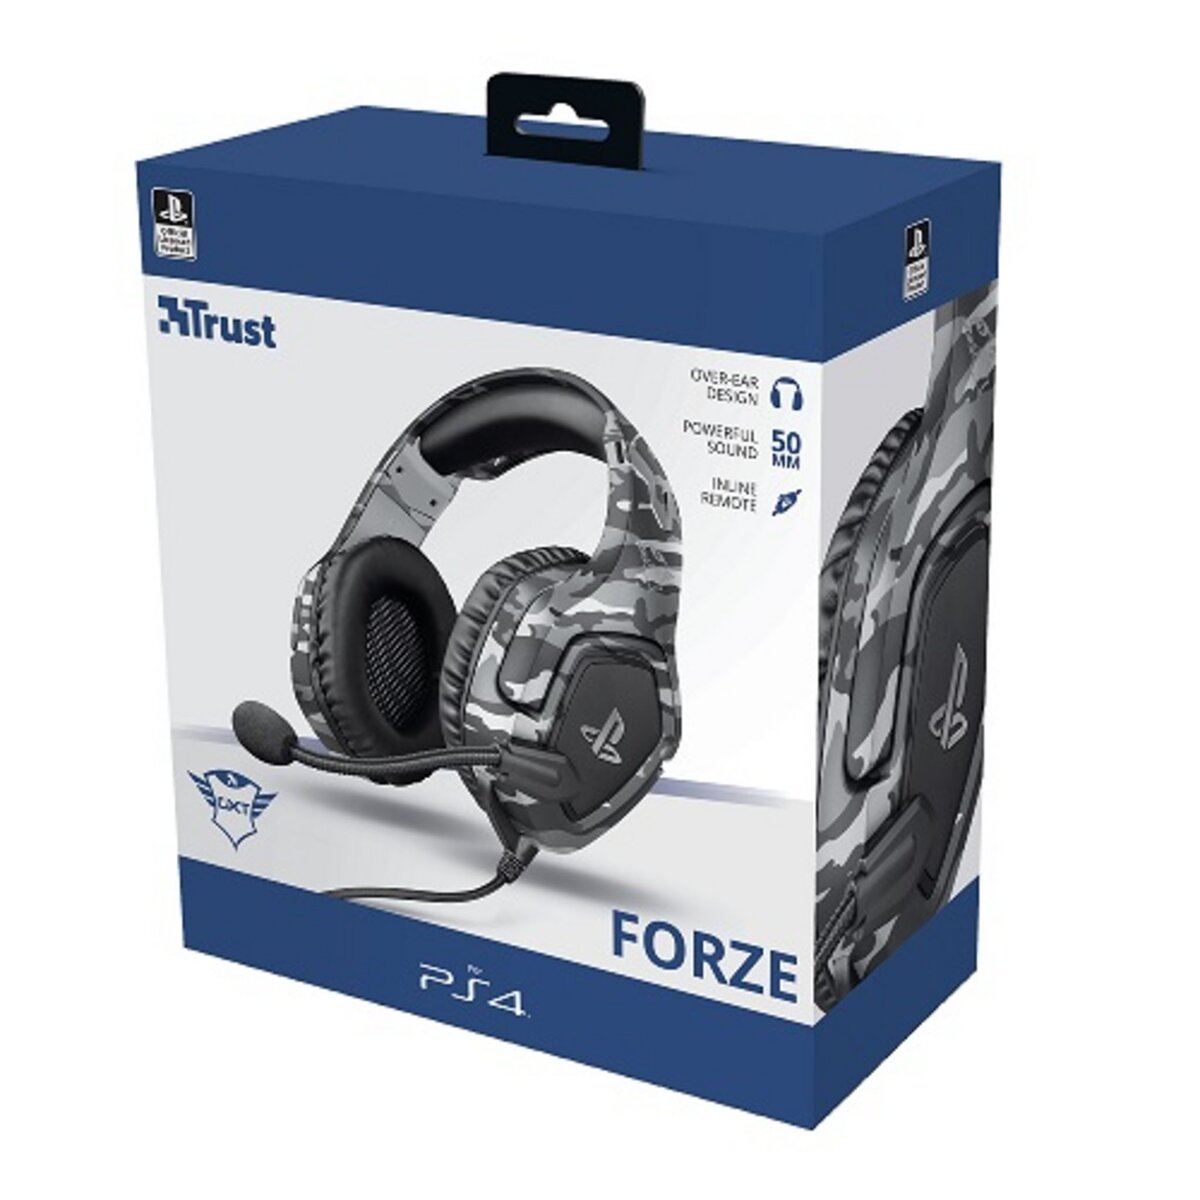 Casque gaming blanc avec micro compatible ps5 xbox seire x/s ps4 xbox one  et pc SUBSONIC Pas Cher 